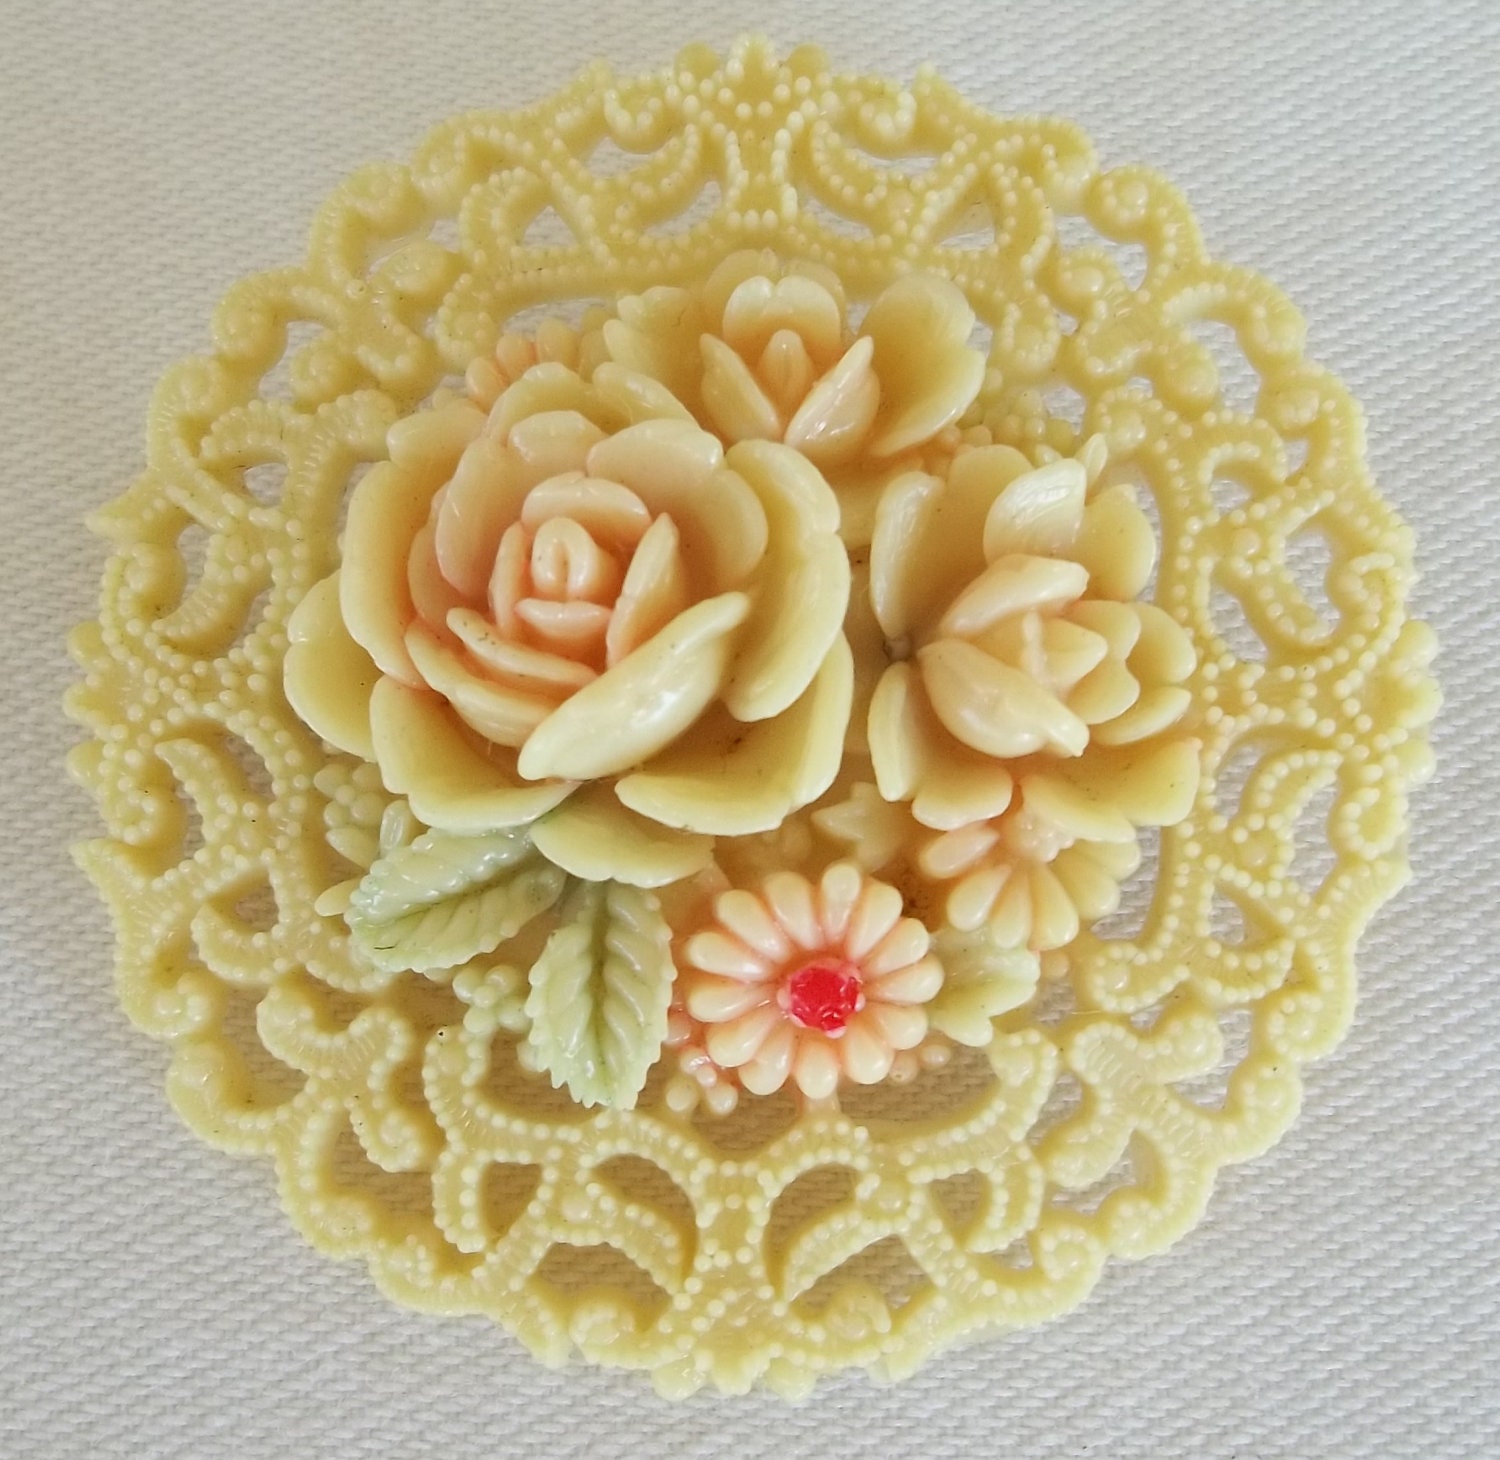 Vintage 1940's Carved Celluloid Pin Brooch Occupied Japan Roses Daisy Flowers - FarisMandyEtsy